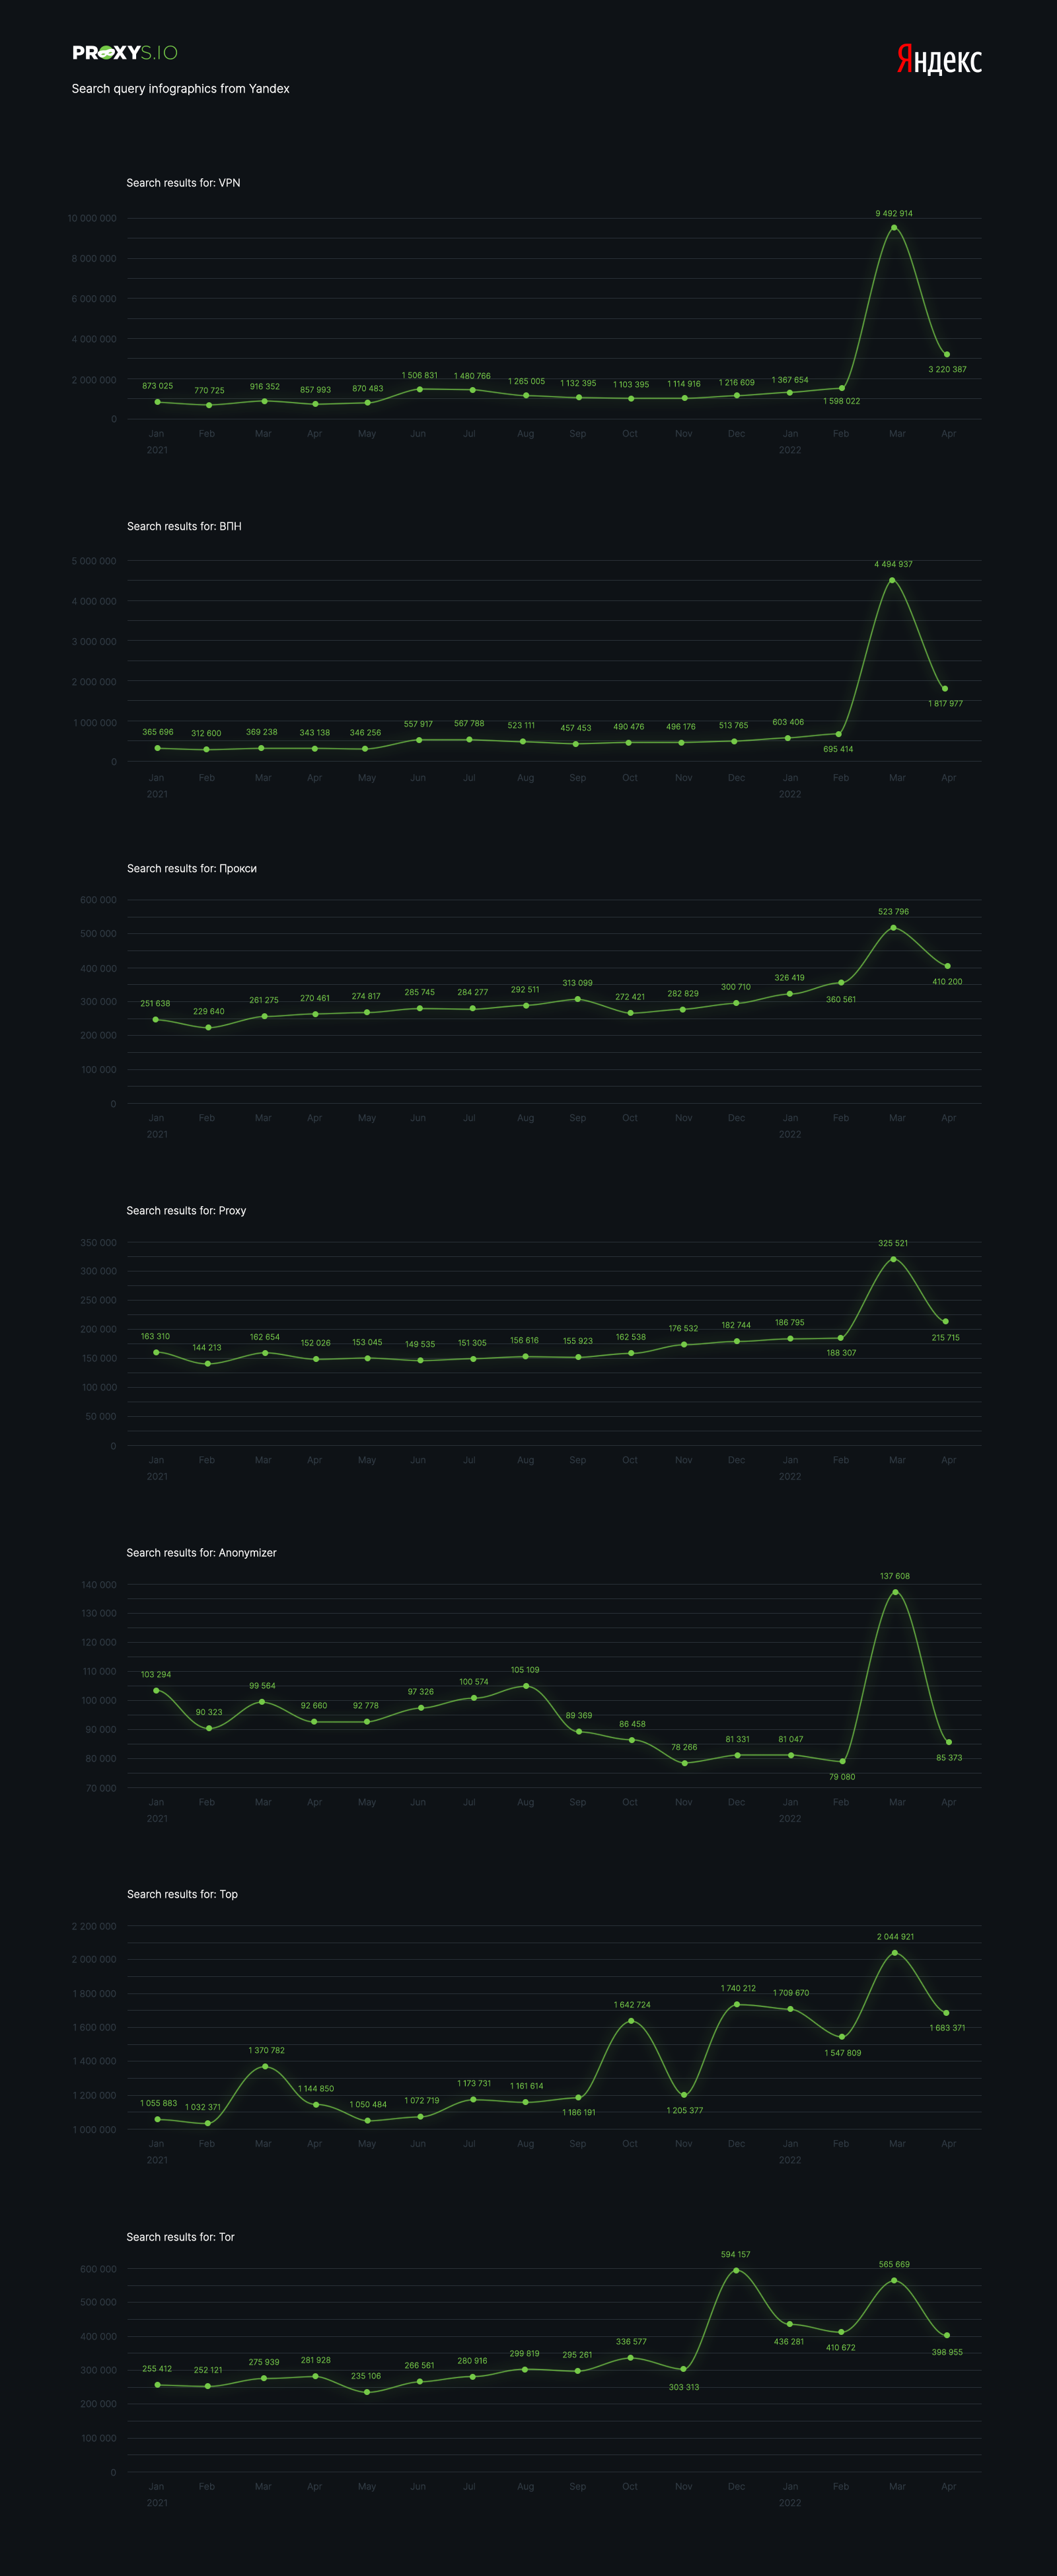 Search query infographics from Yandex